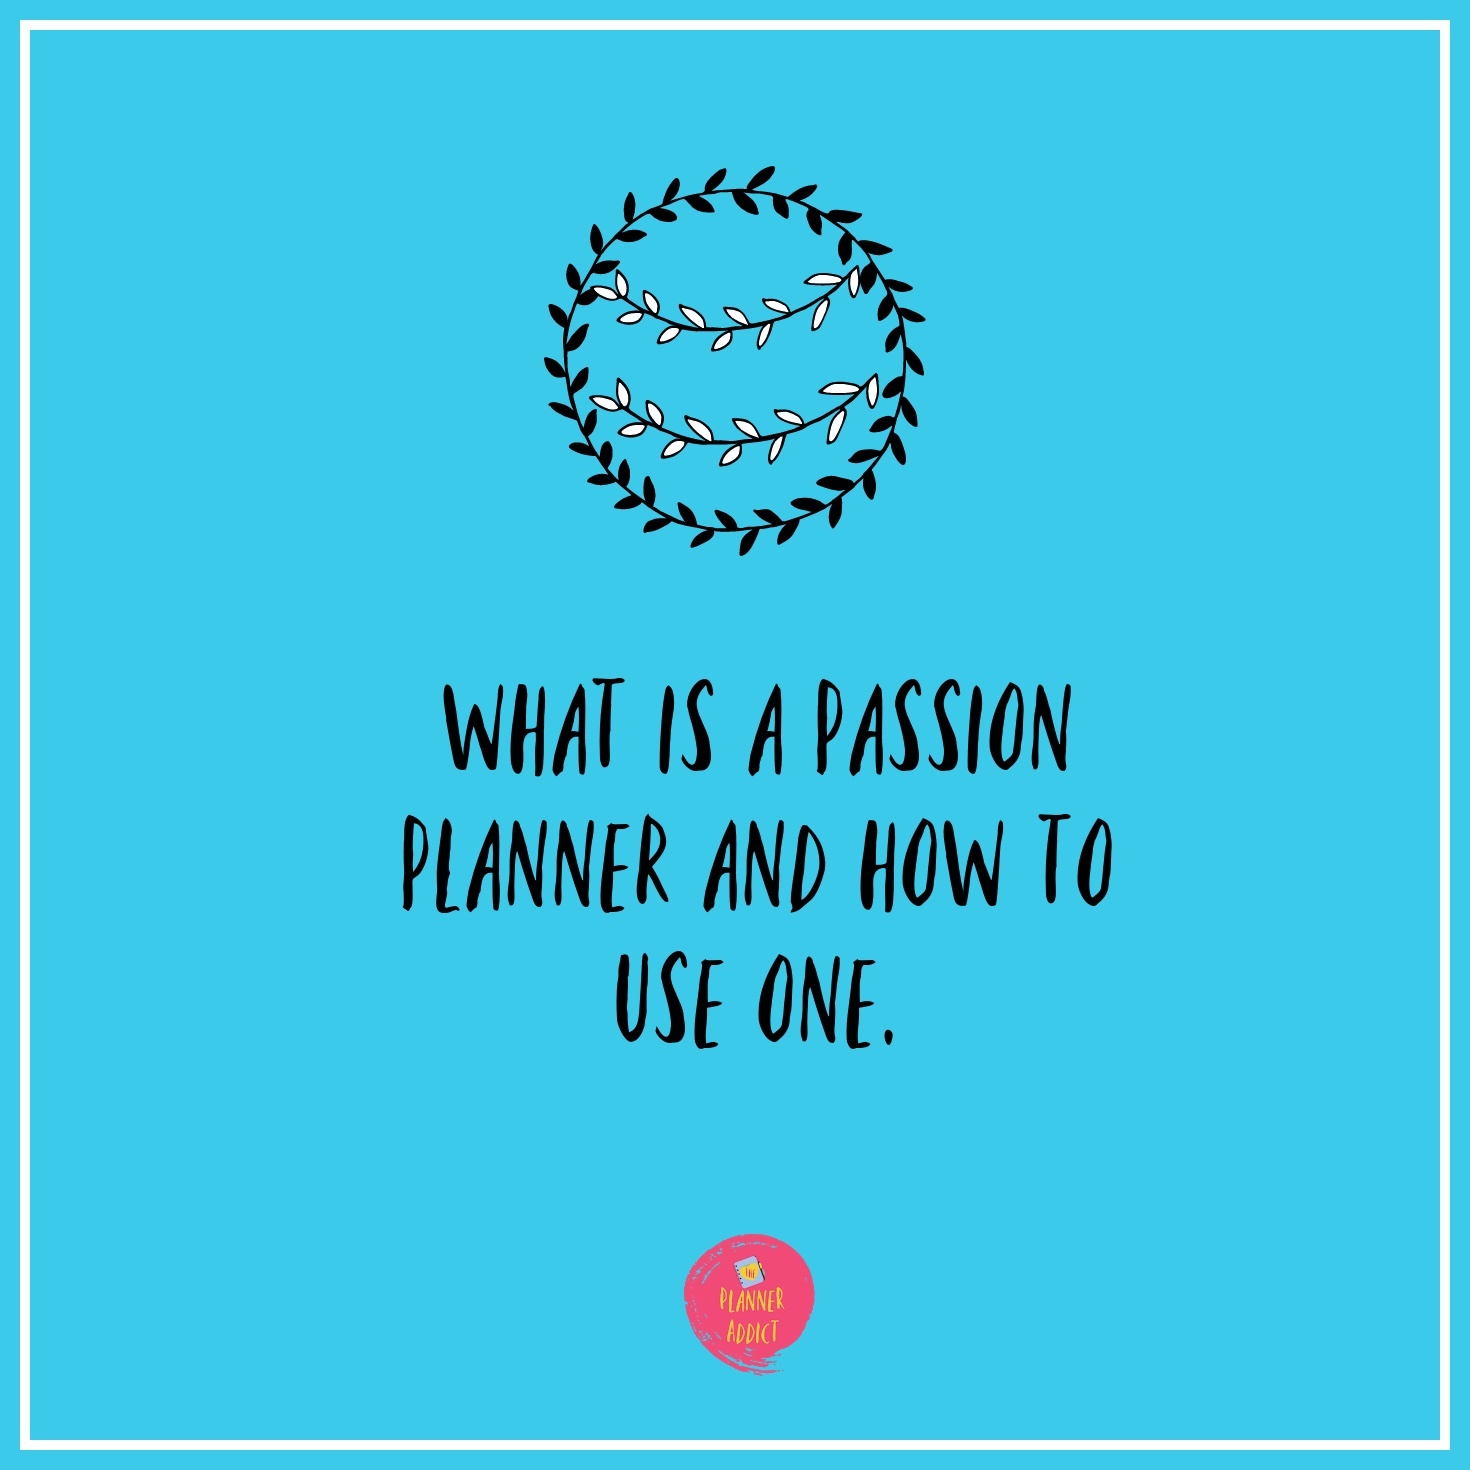 What is a Passion Planner and How to Use One.